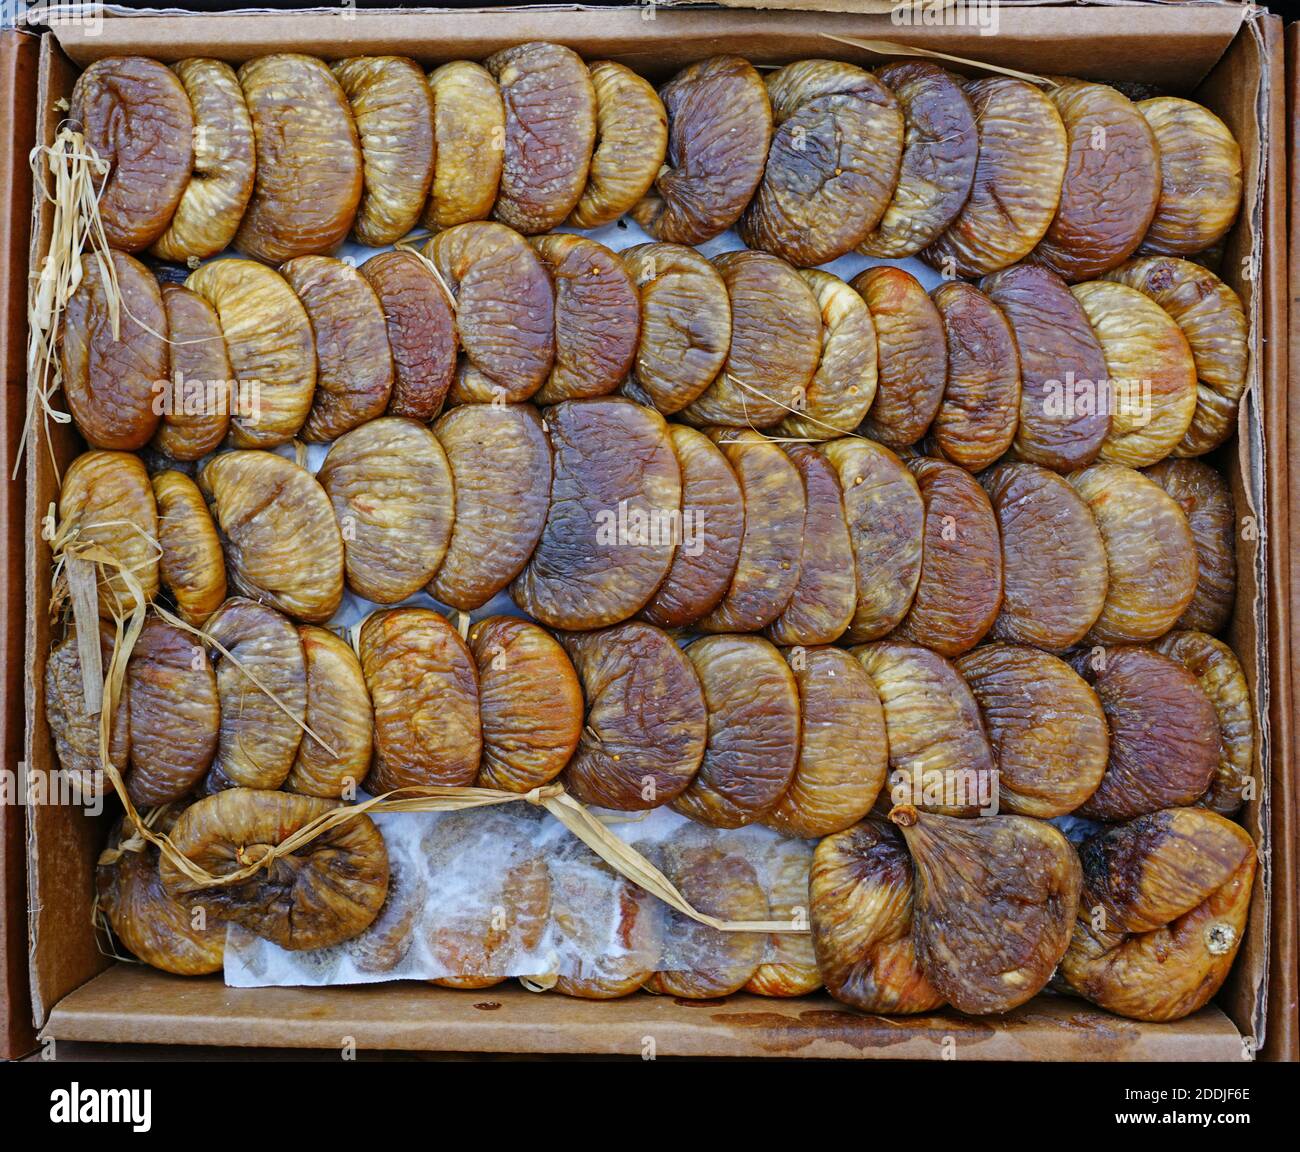 Box of plump dried figs at a market Stock Photo